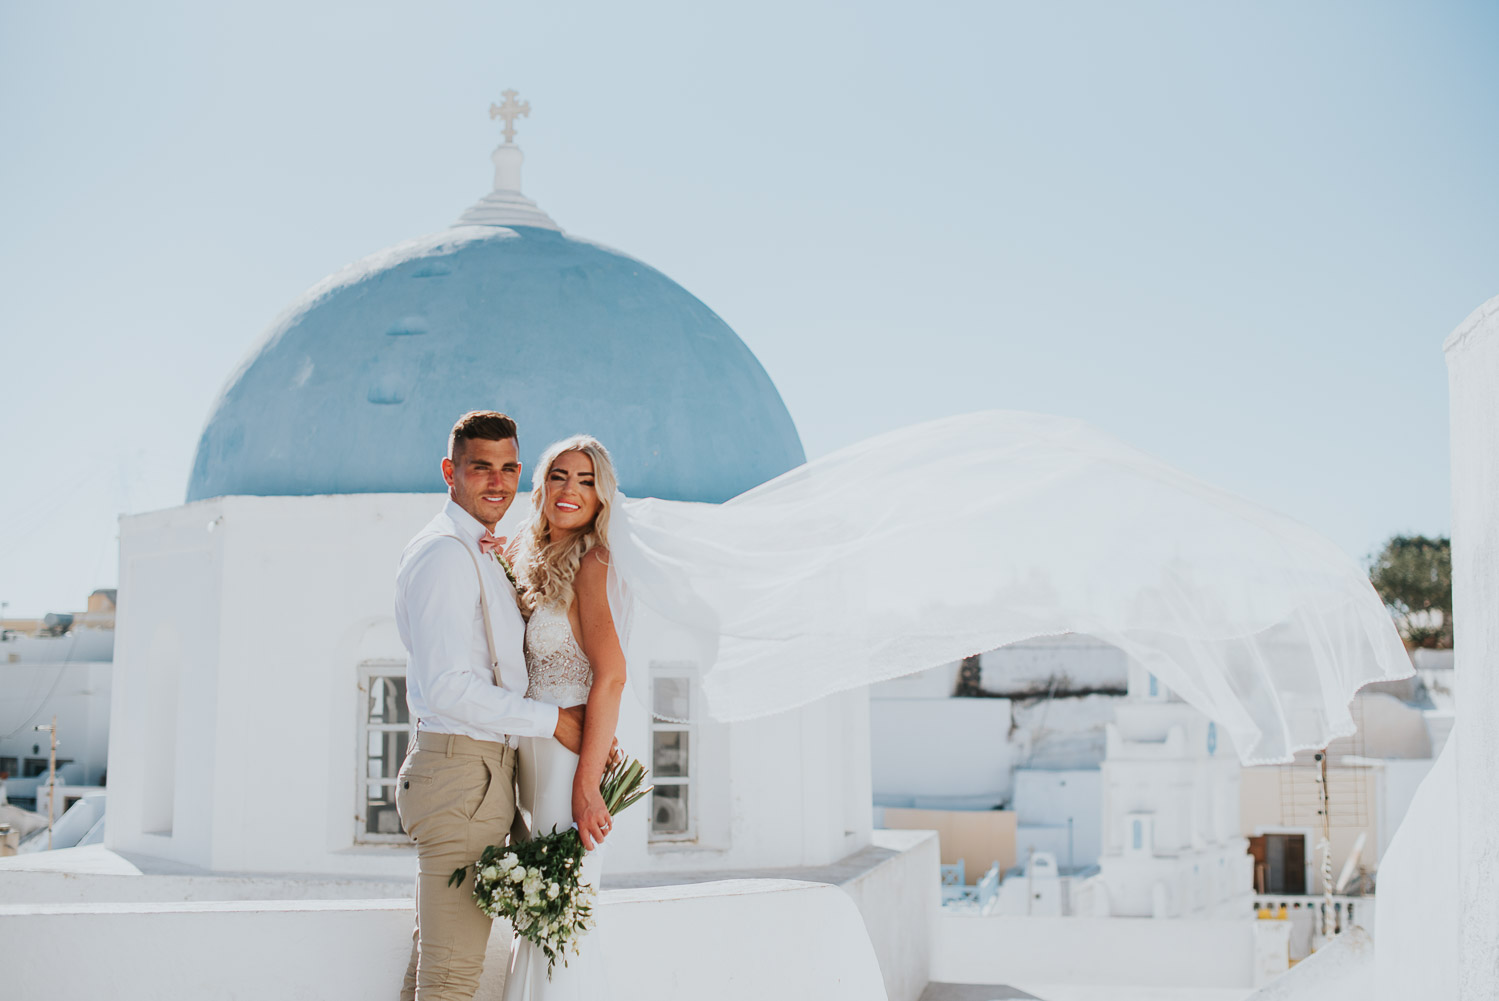 Wedding photographer Santorini: bride and groom looking at the camera with the blue dome behind them and the veil in the wind by Ben and Vesna.